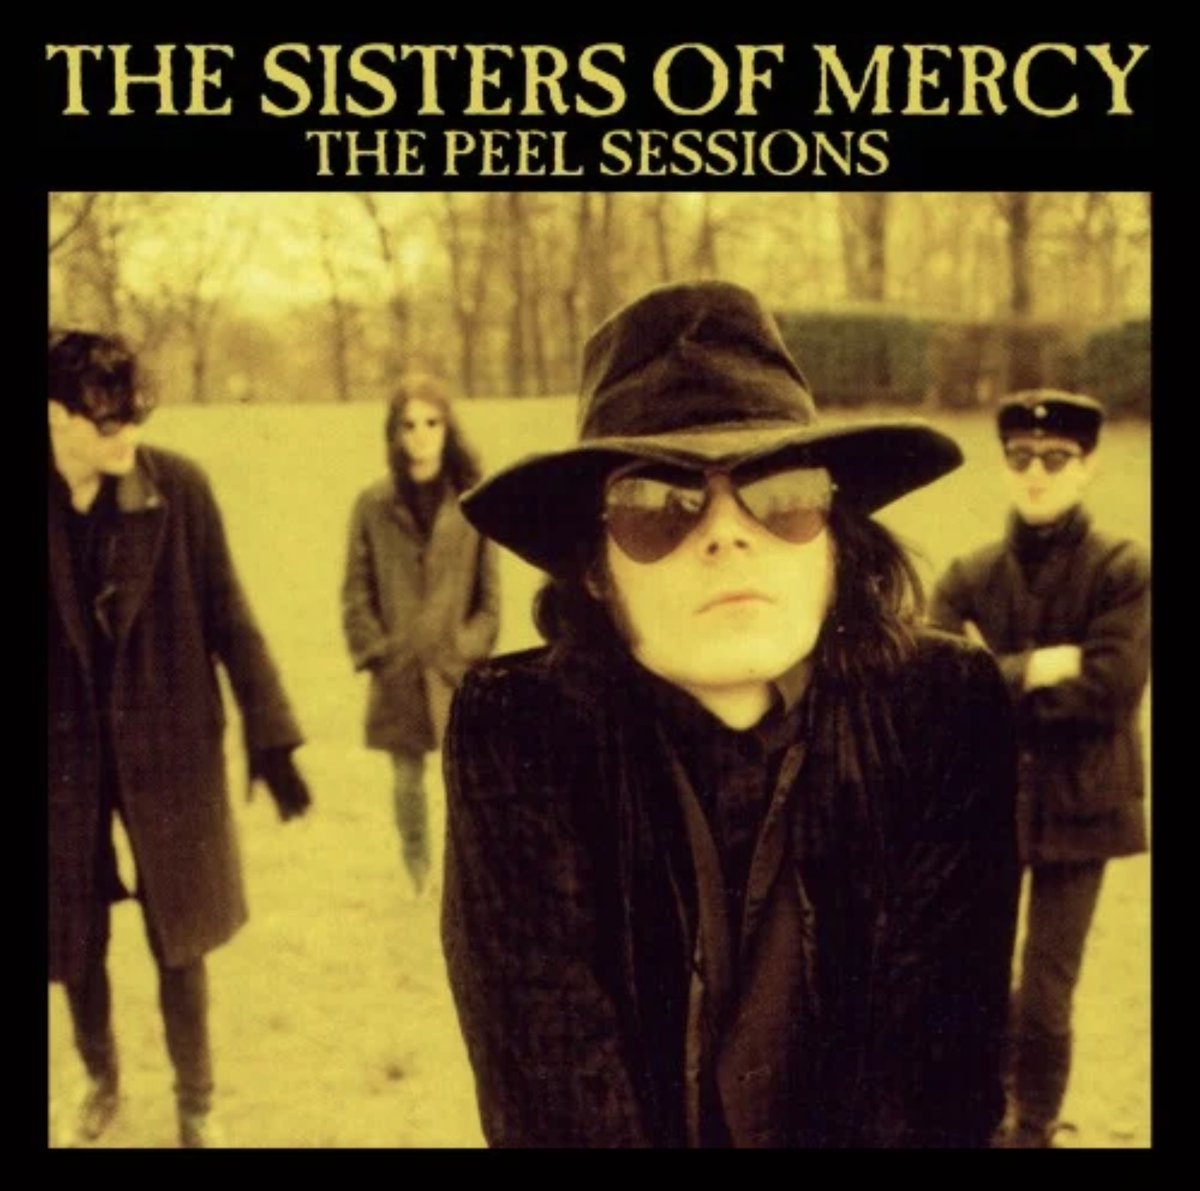 The Sisters Of Mercy – The John Peel Sessions, 1982-1984. bit.ly/3GLLuHJ #TheSistersOfMercy @NewWaveAndPunk